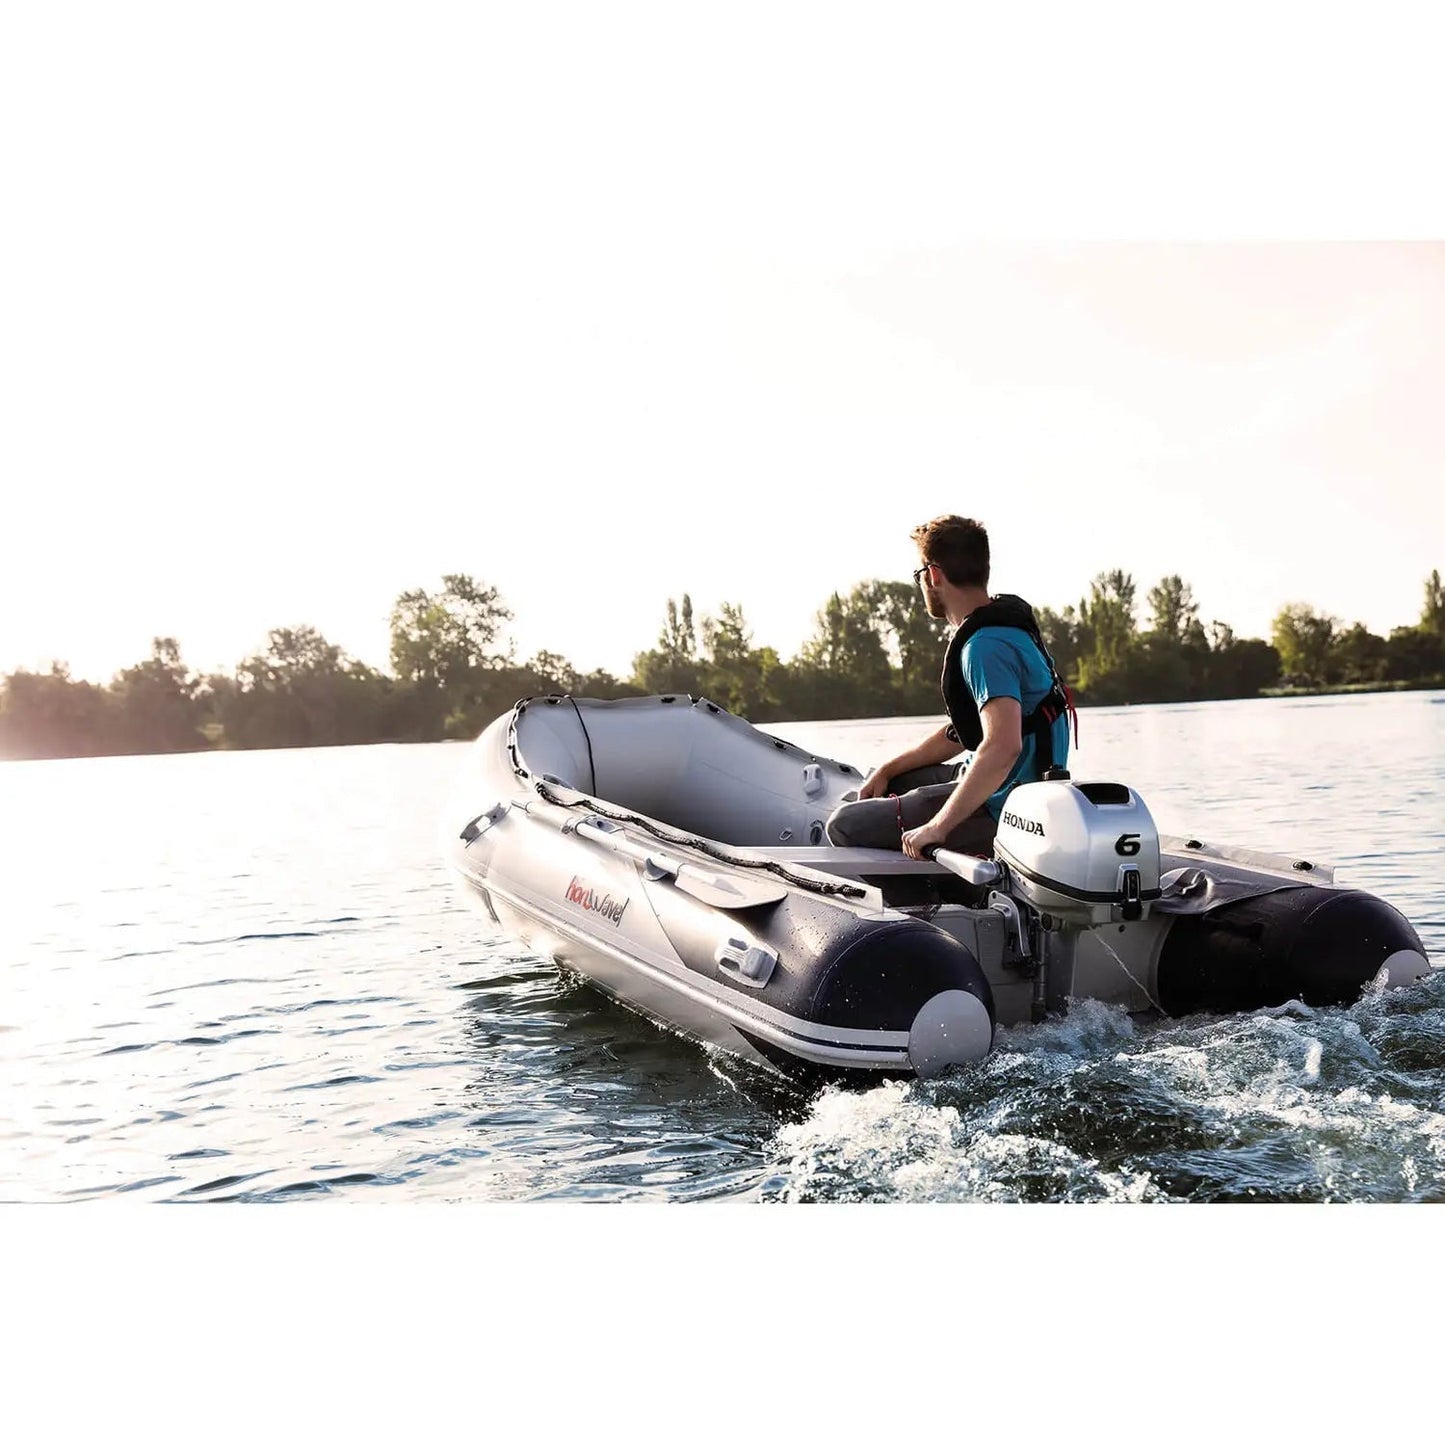 Honwave Package - T38IE3 3.8m Inflatable Boat Dinghy Air V-Floor & Honda Bf2.3 2.3hp Outboard Engine